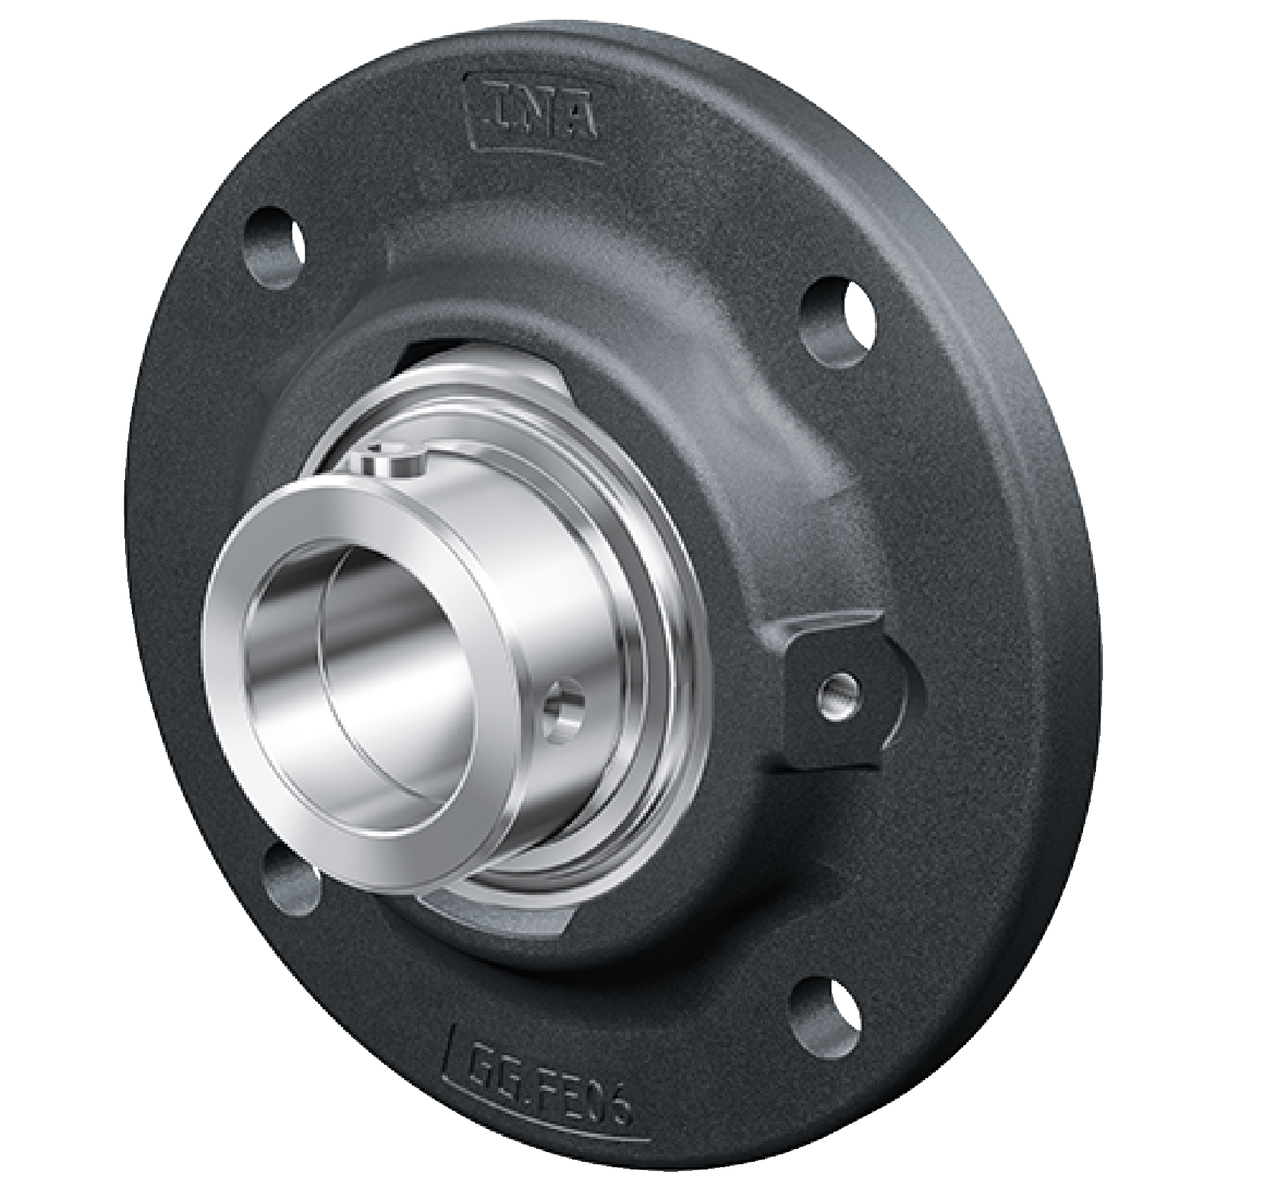 Flanged housing unit, TFE Series